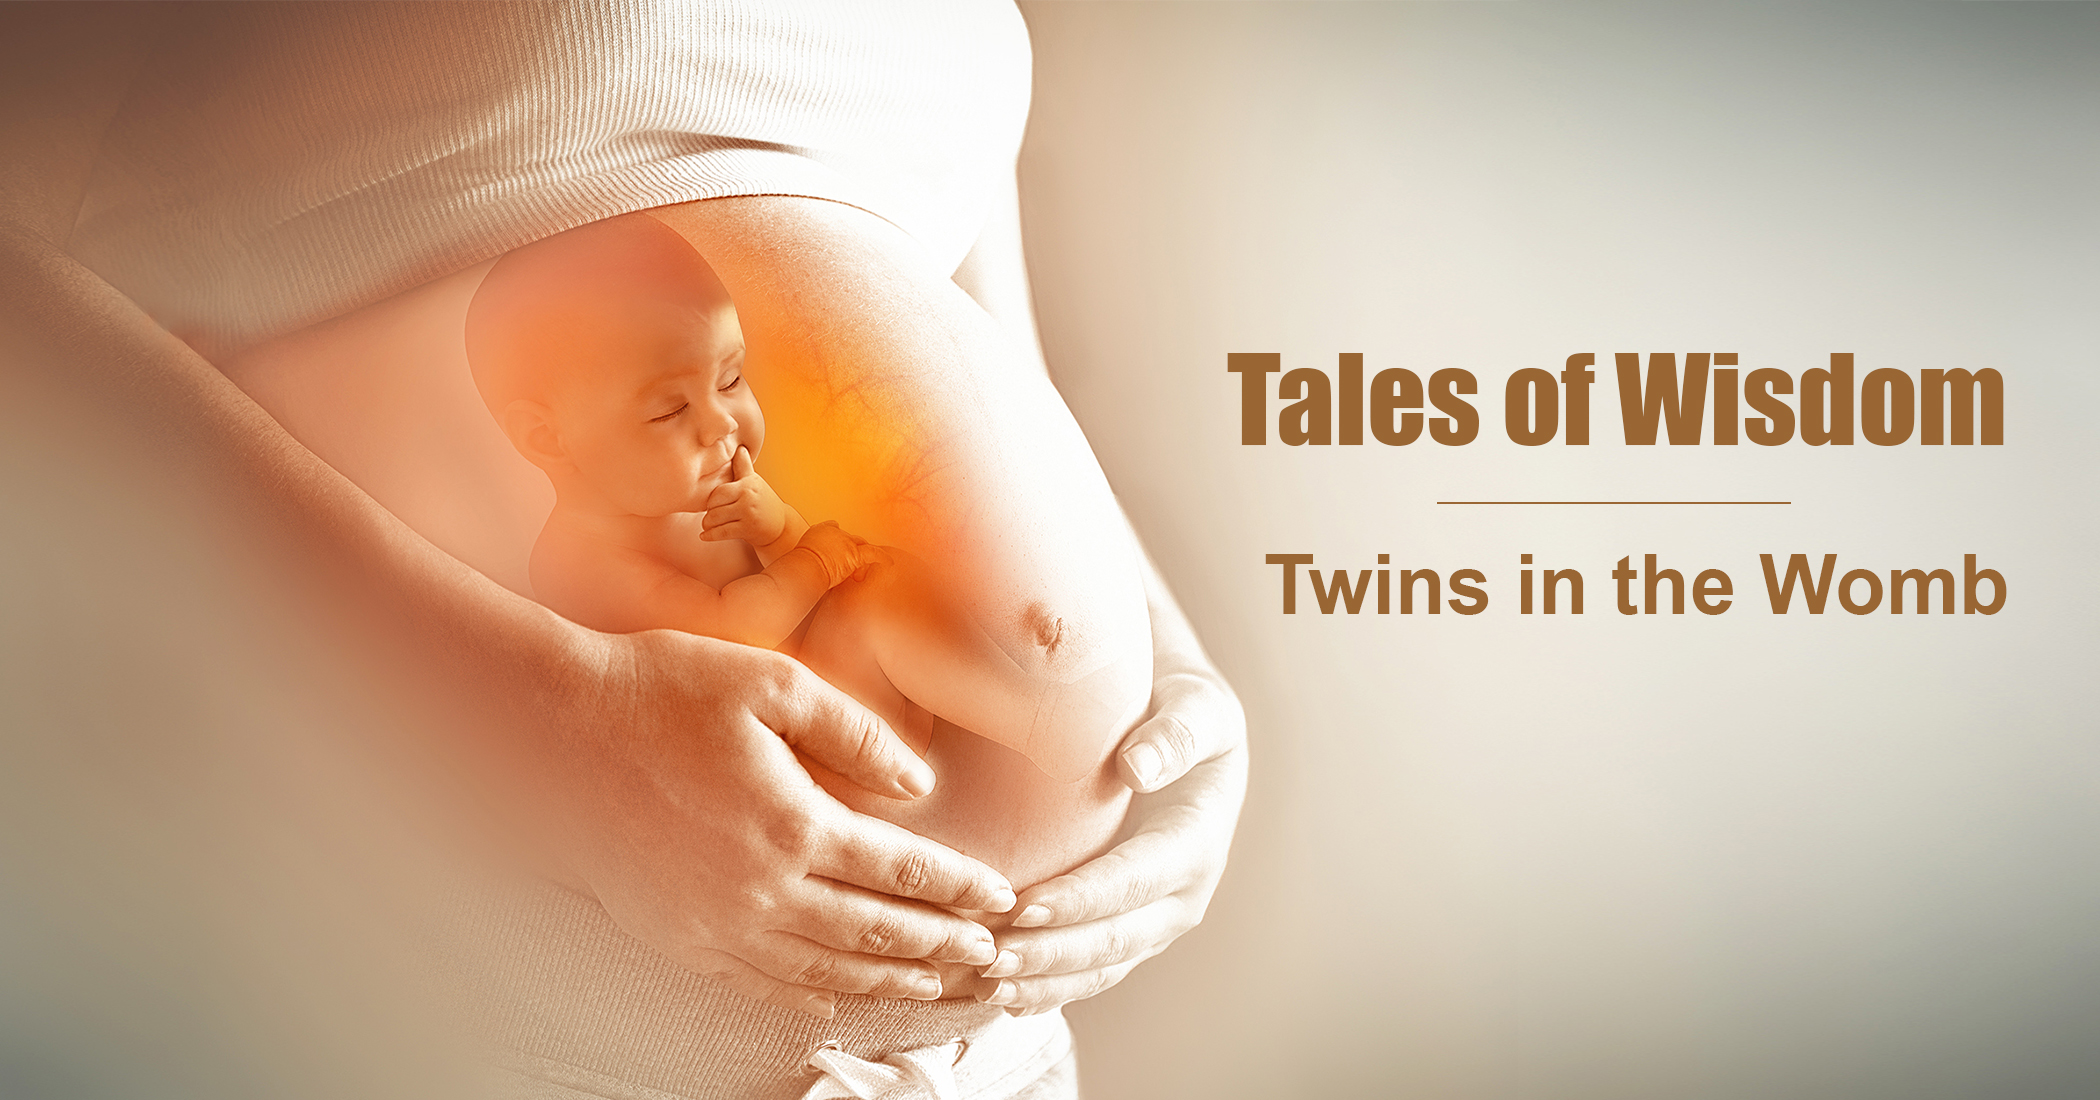 NextImg:'Do you believe in life after birth?': A tale of twins in the womb